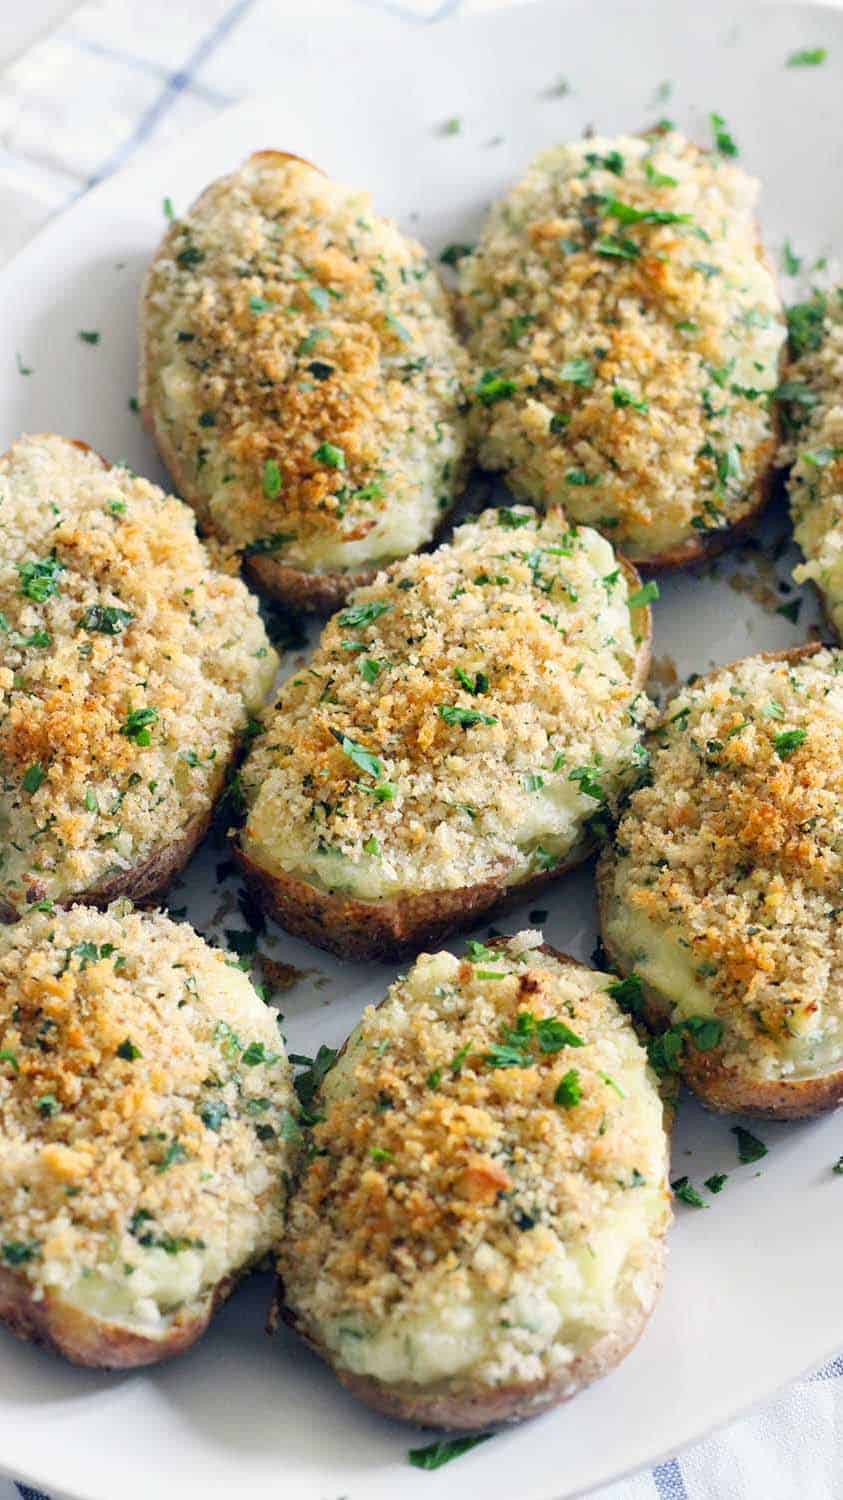 Creamy on the inside, crunchy breadcrumb topping on the outside- these are the BEST twice baked potatoes EVER! Perfect for Thanksgiving or any Holiday meal. Plus, they're freezable if you assemble ahead of time or have leftovers. Sponsored by @IdahoPotatoes. This is my late grandfather's famous recipe, and I can't remember a holiday meal without them!